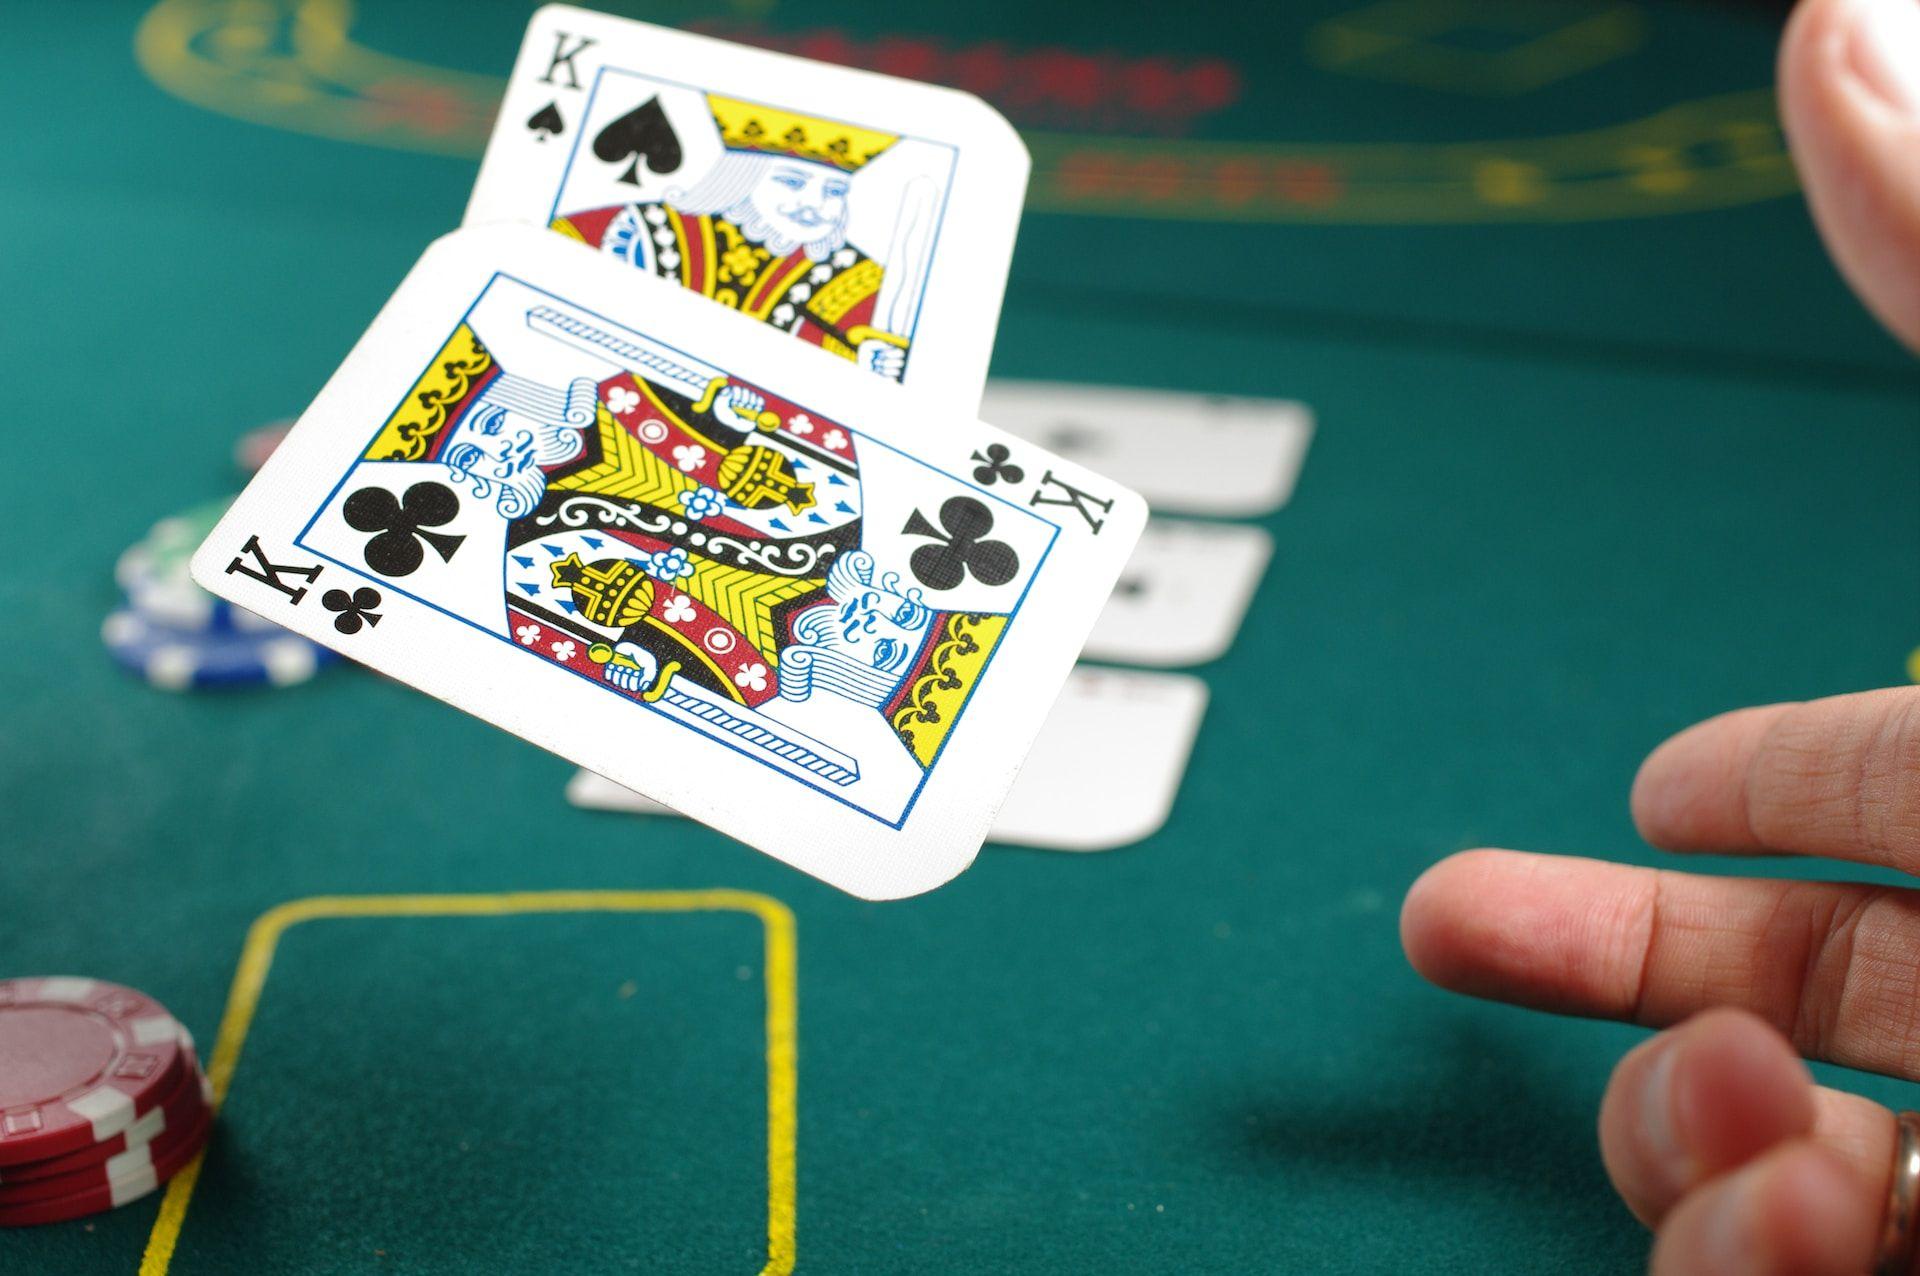 Online casinos: how to improve upon your gambling skills?